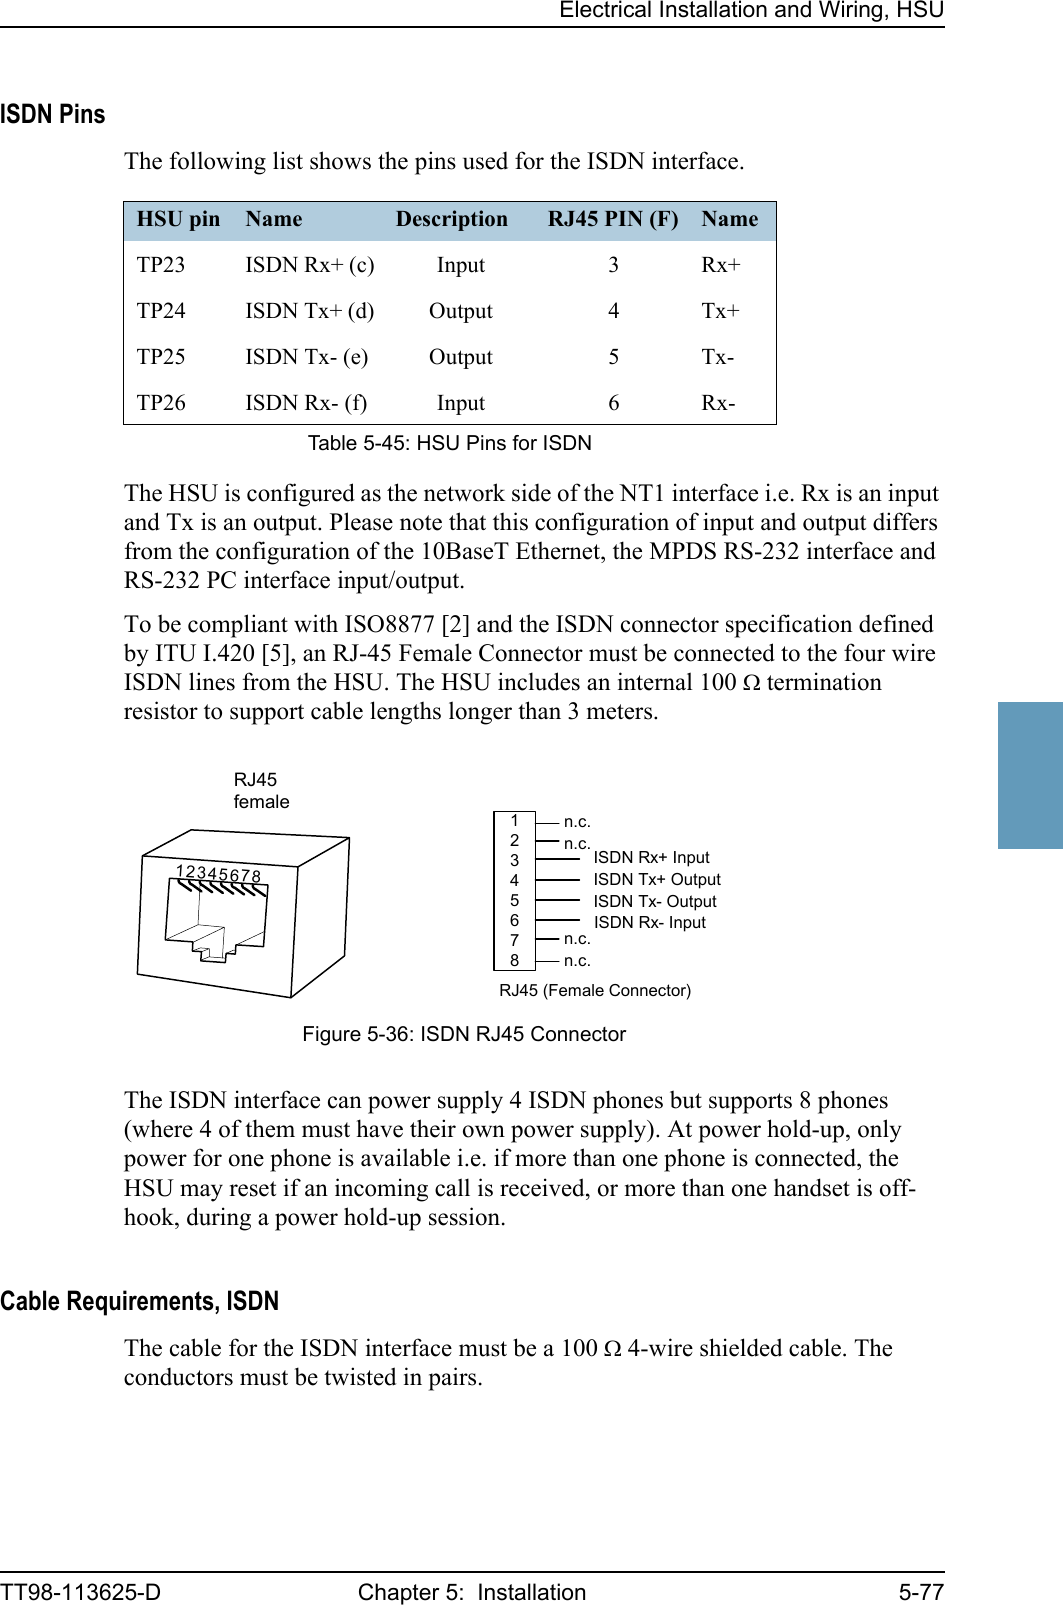 Electrical Installation and Wiring, HSUTT98-113625-D Chapter 5:  Installation 5-775555ISDN PinsThe following list shows the pins used for the ISDN interface.The HSU is configured as the network side of the NT1 interface i.e. Rx is an input and Tx is an output. Please note that this configuration of input and output differs from the configuration of the 10BaseT Ethernet, the MPDS RS-232 interface and RS-232 PC interface input/output.To be compliant with ISO8877 [2] and the ISDN connector specification defined by ITU I.420 [5], an RJ-45 Female Connector must be connected to the four wire ISDN lines from the HSU. The HSU includes an internal 100 Ω termination resistor to support cable lengths longer than 3 meters.The ISDN interface can power supply 4 ISDN phones but supports 8 phones (where 4 of them must have their own power supply). At power hold-up, only power for one phone is available i.e. if more than one phone is connected, the HSU may reset if an incoming call is received, or more than one handset is off-hook, during a power hold-up session. Cable Requirements, ISDNThe cable for the ISDN interface must be a 100 Ω 4-wire shielded cable. The conductors must be twisted in pairs.HSU pin Name Description RJ45 PIN (F) NameTP23 ISDN Rx+ (c) Input 3 Rx+TP24 ISDN Tx+ (d) Output 4 Tx+TP25 ISDN Tx- (e) Output 5 Tx-TP26 ISDN Rx- (f) Input 6 Rx-Table 5-45: HSU Pins for ISDNFigure 5-36: ISDN RJ45 Connector12345678ISDN Rx+ InputISDN Tx+ OutputISDN Tx- OutputISDN Rx- Inputn.c.n.c.n.c.n.c.RJ45 (Female Connector)RJ45female12345678